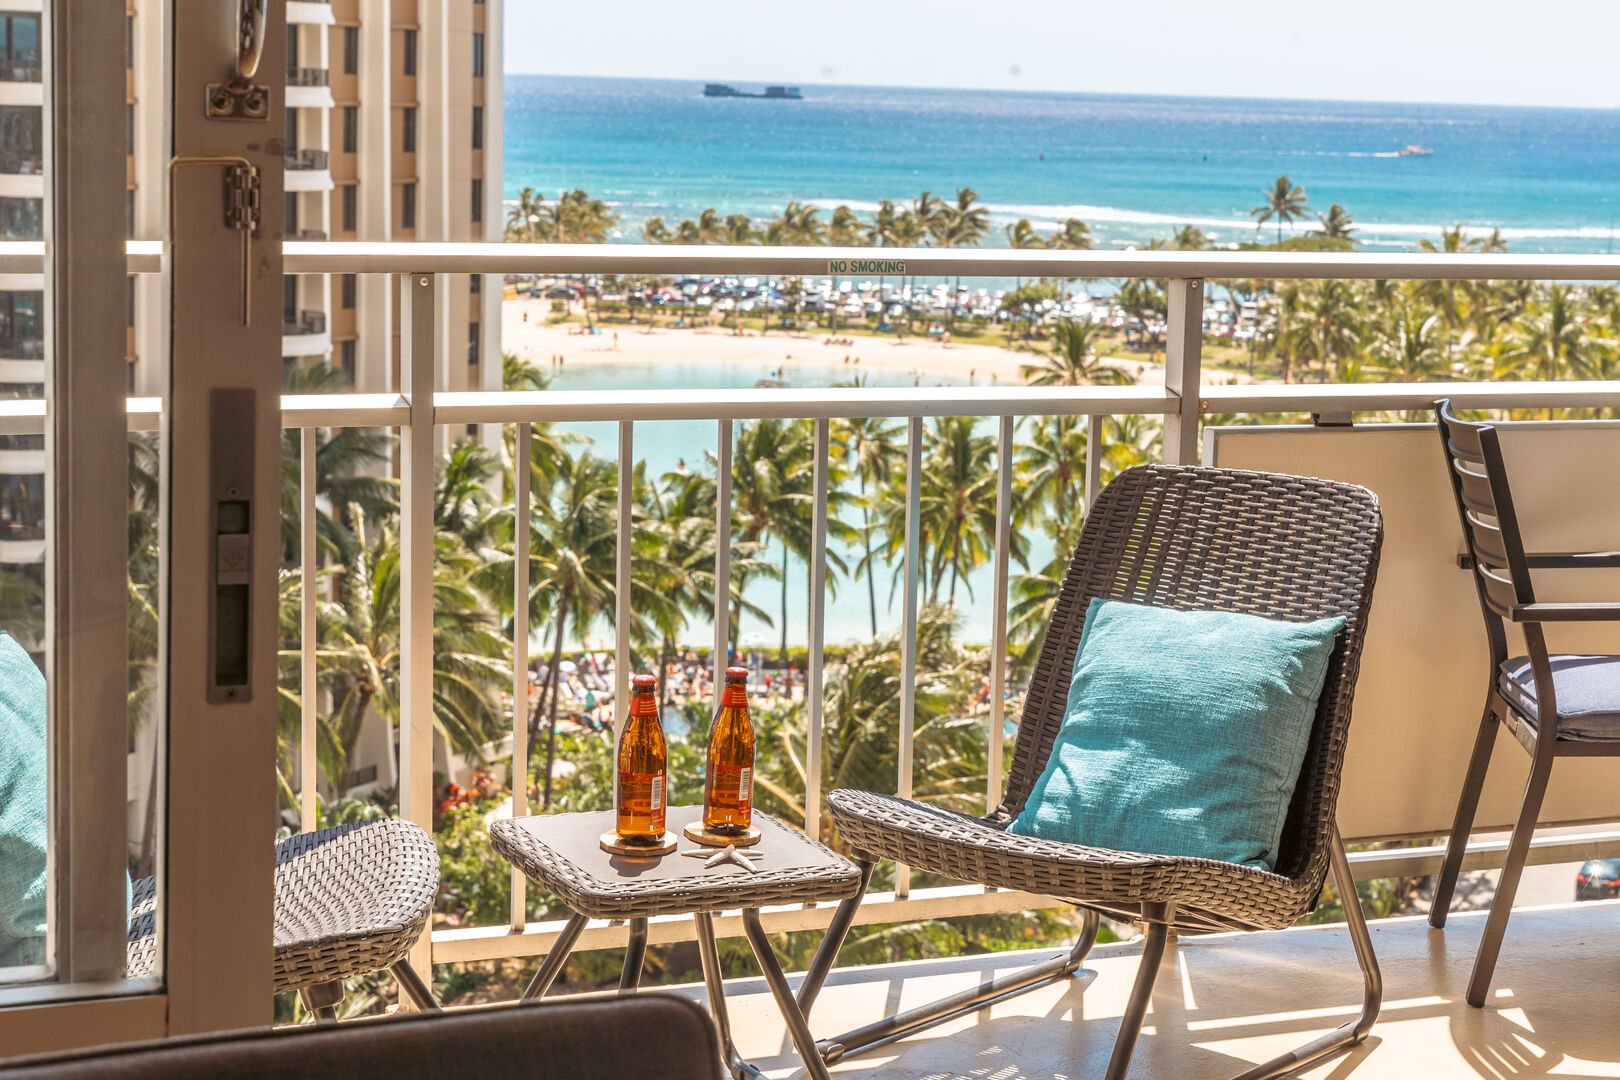 Have coffee or a bottle of beer on your balcony with this kind of view.